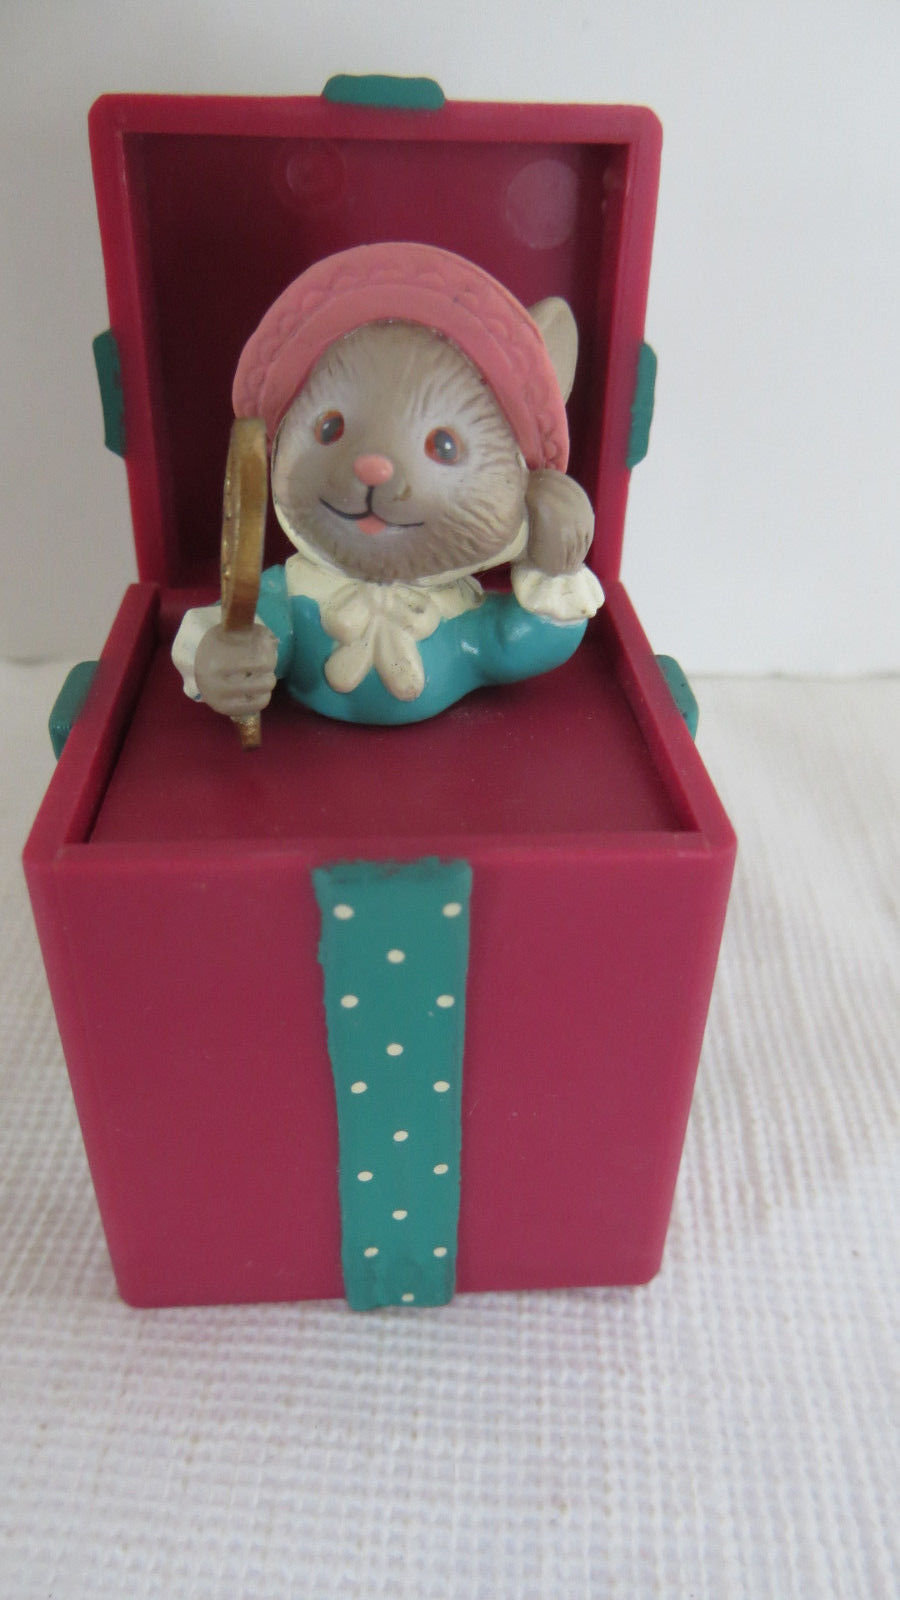 Primary image for Enesco 1994 Merry Miss Merry "Now You See It" Pop Up Ornament No Box